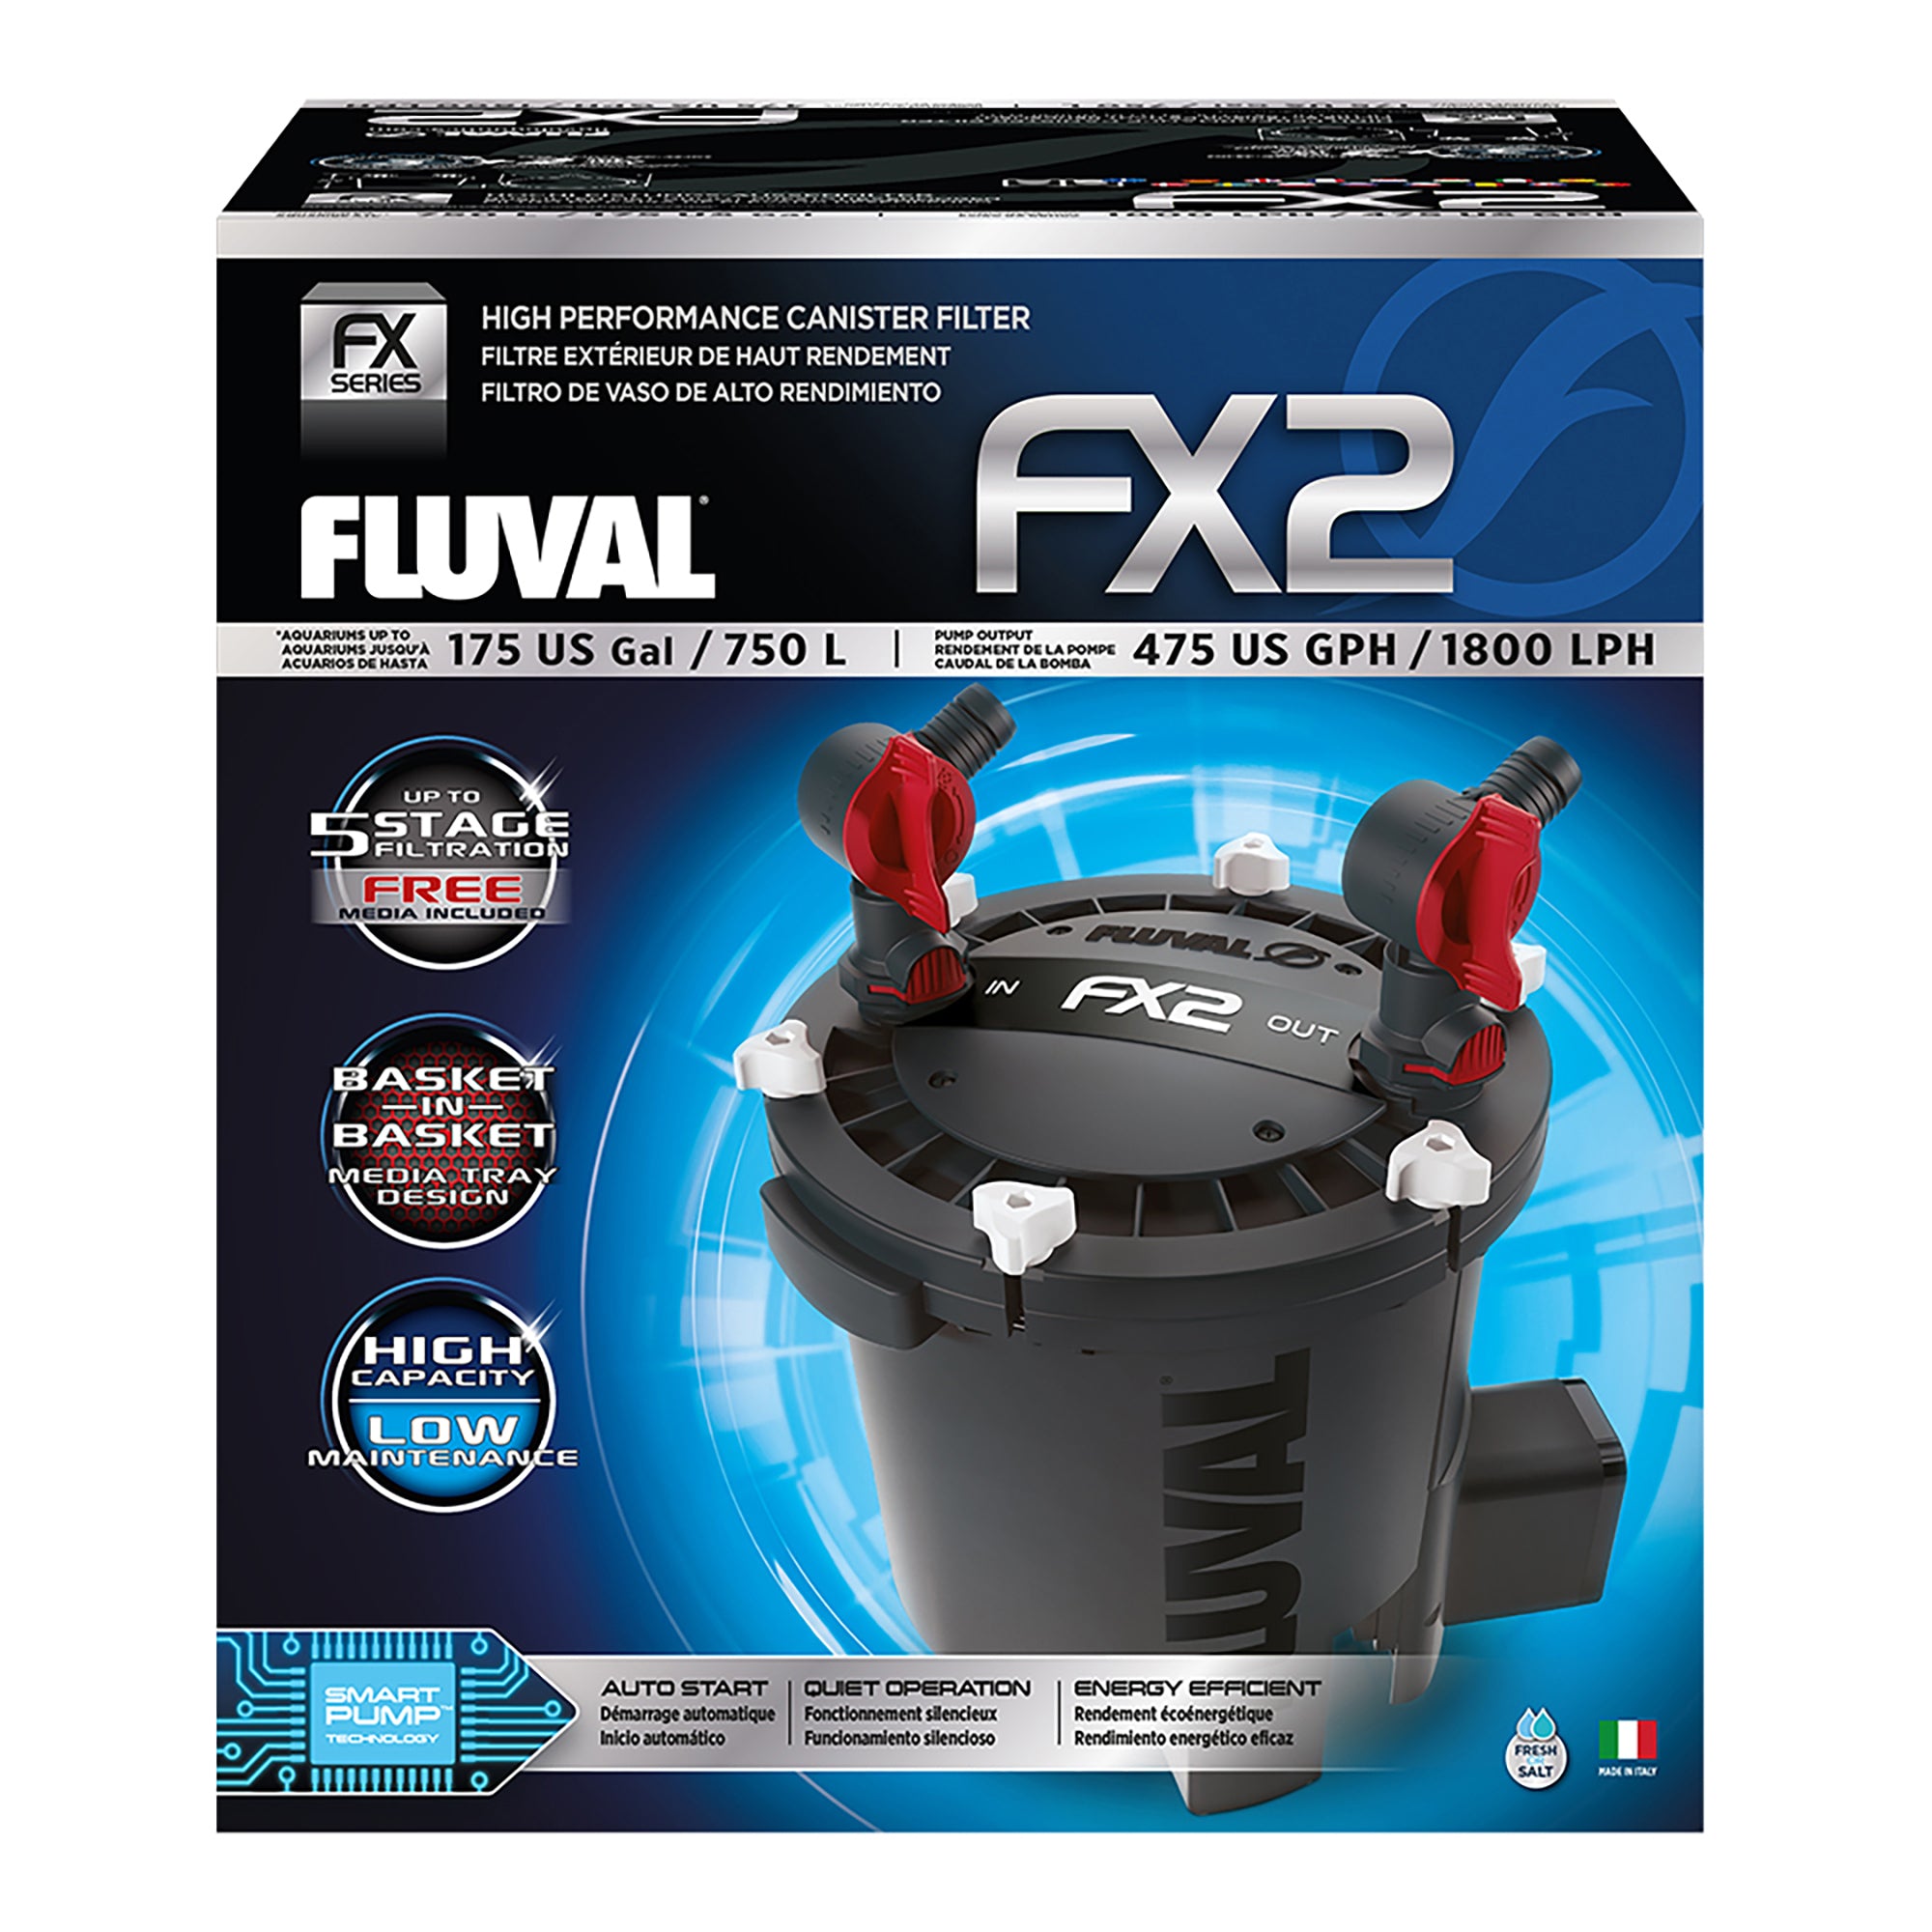 Fluval FX2 Canister Filter (up to 175 gallons)